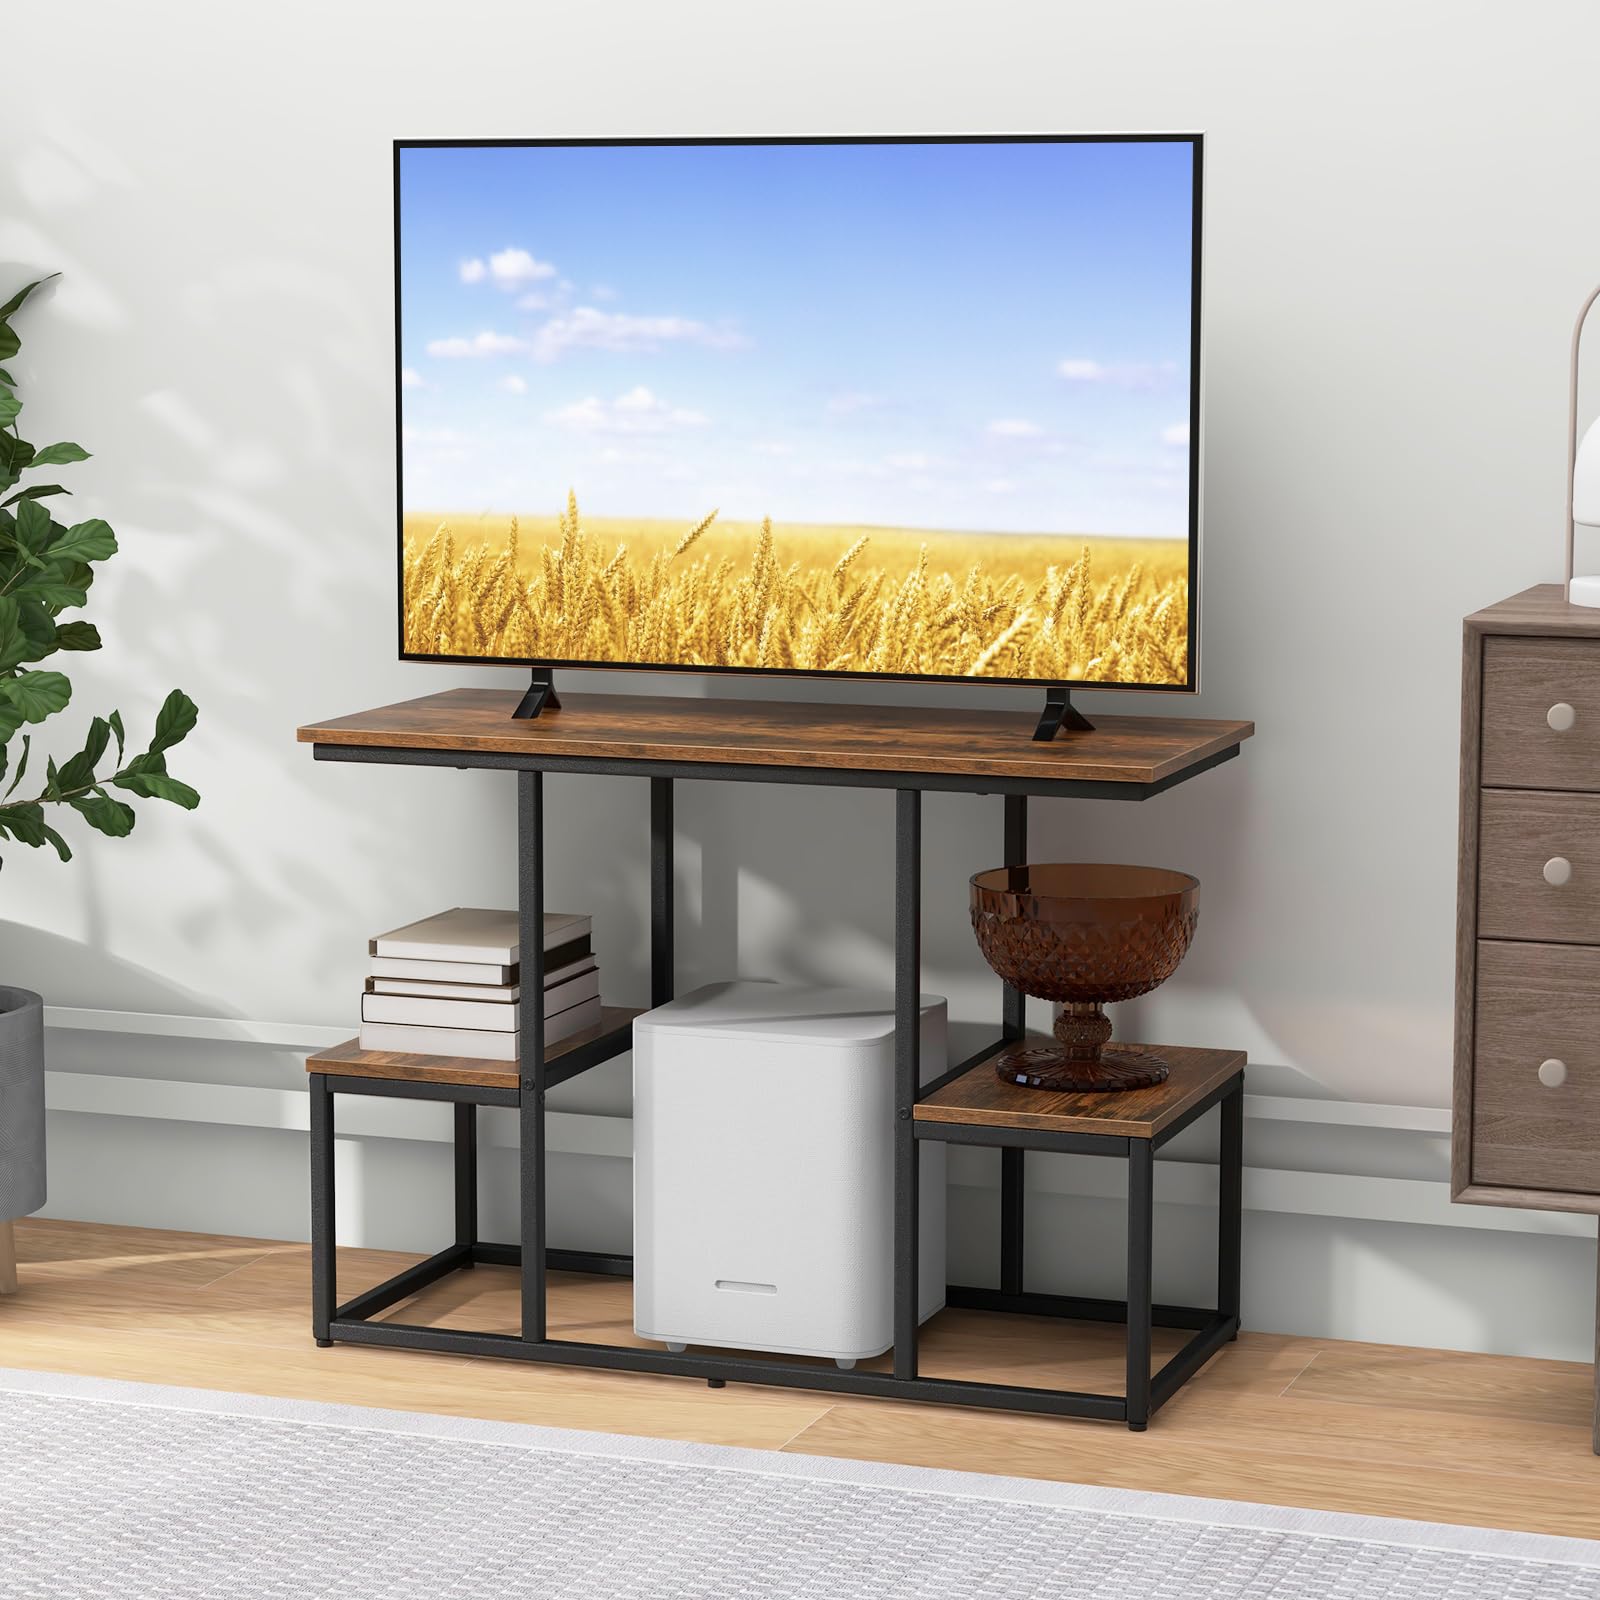 Giantex TV Stand for 50-Inches TVs - Industrial Sofa Table with Open Storage Shelves, 2-Tier Display Rack